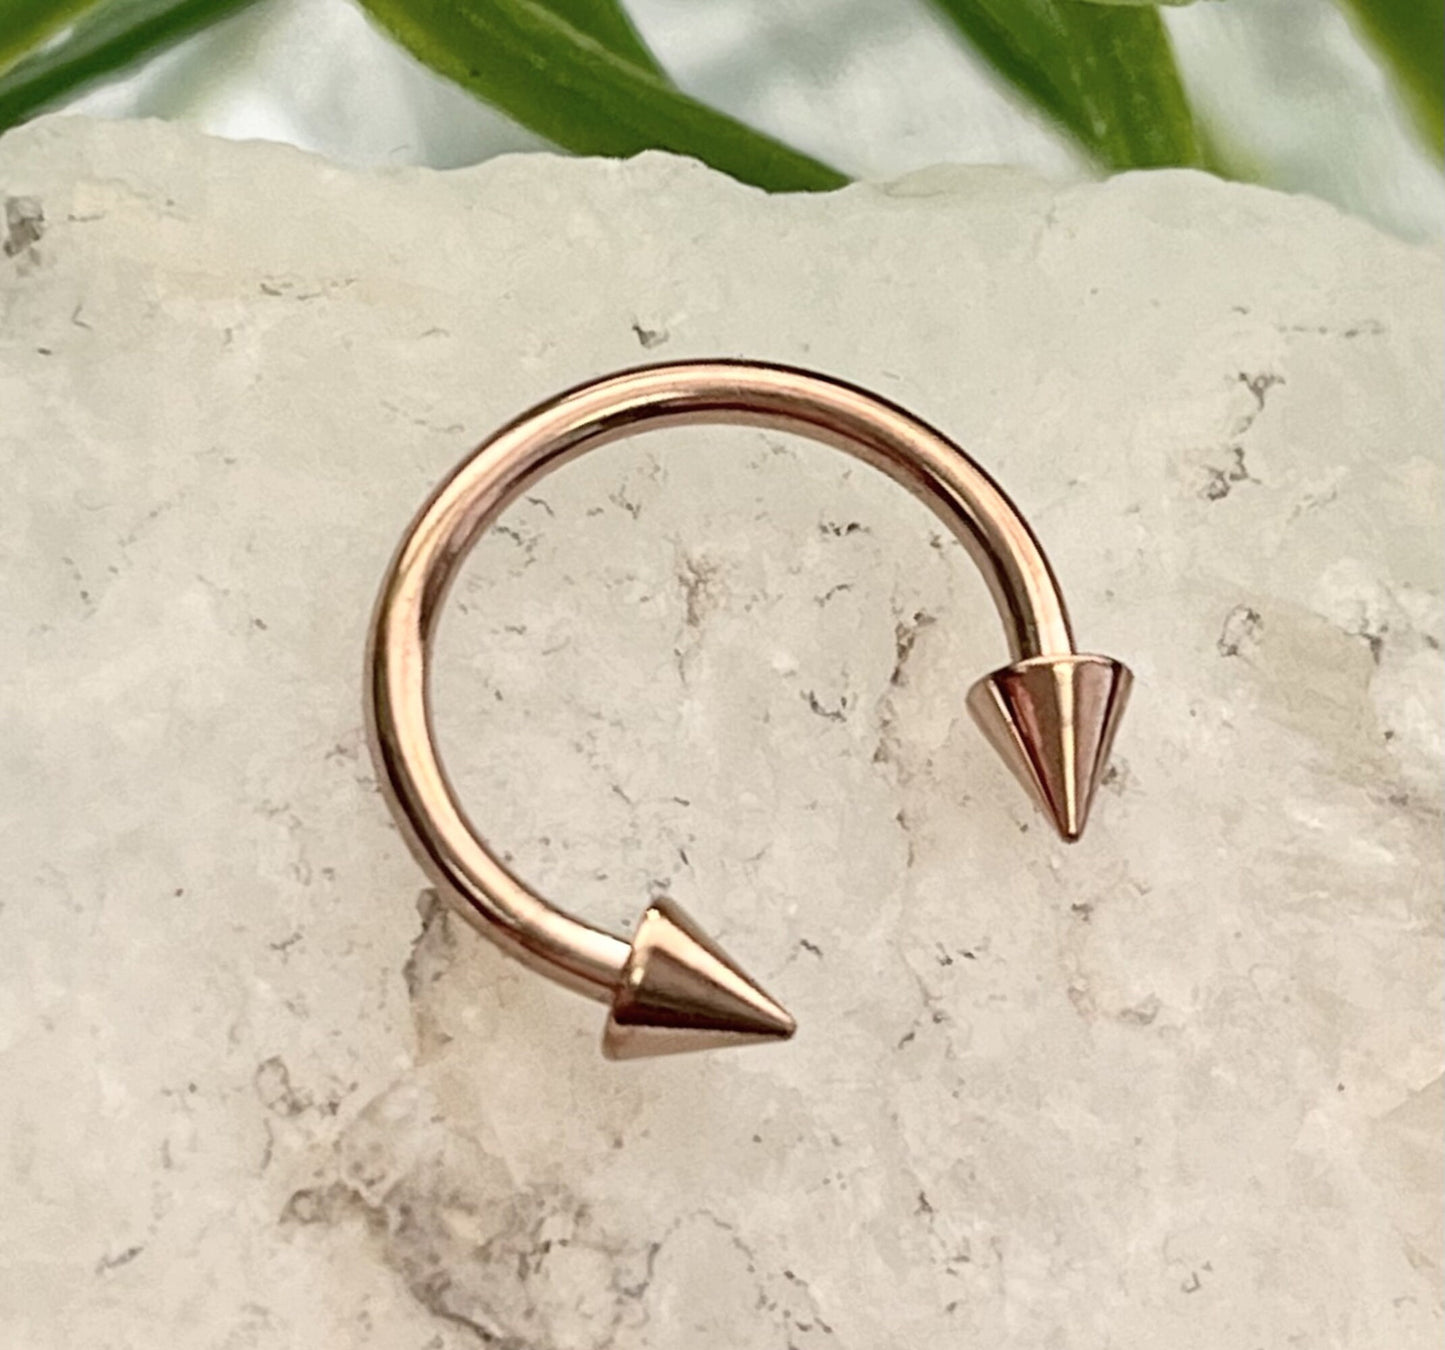 1 Piece Stunning Rose Gold Spiked Circular Barbell Horseshoe Ring - 16g, 14g- Internal Diameter 6mm, 8mm, 10mm Available!